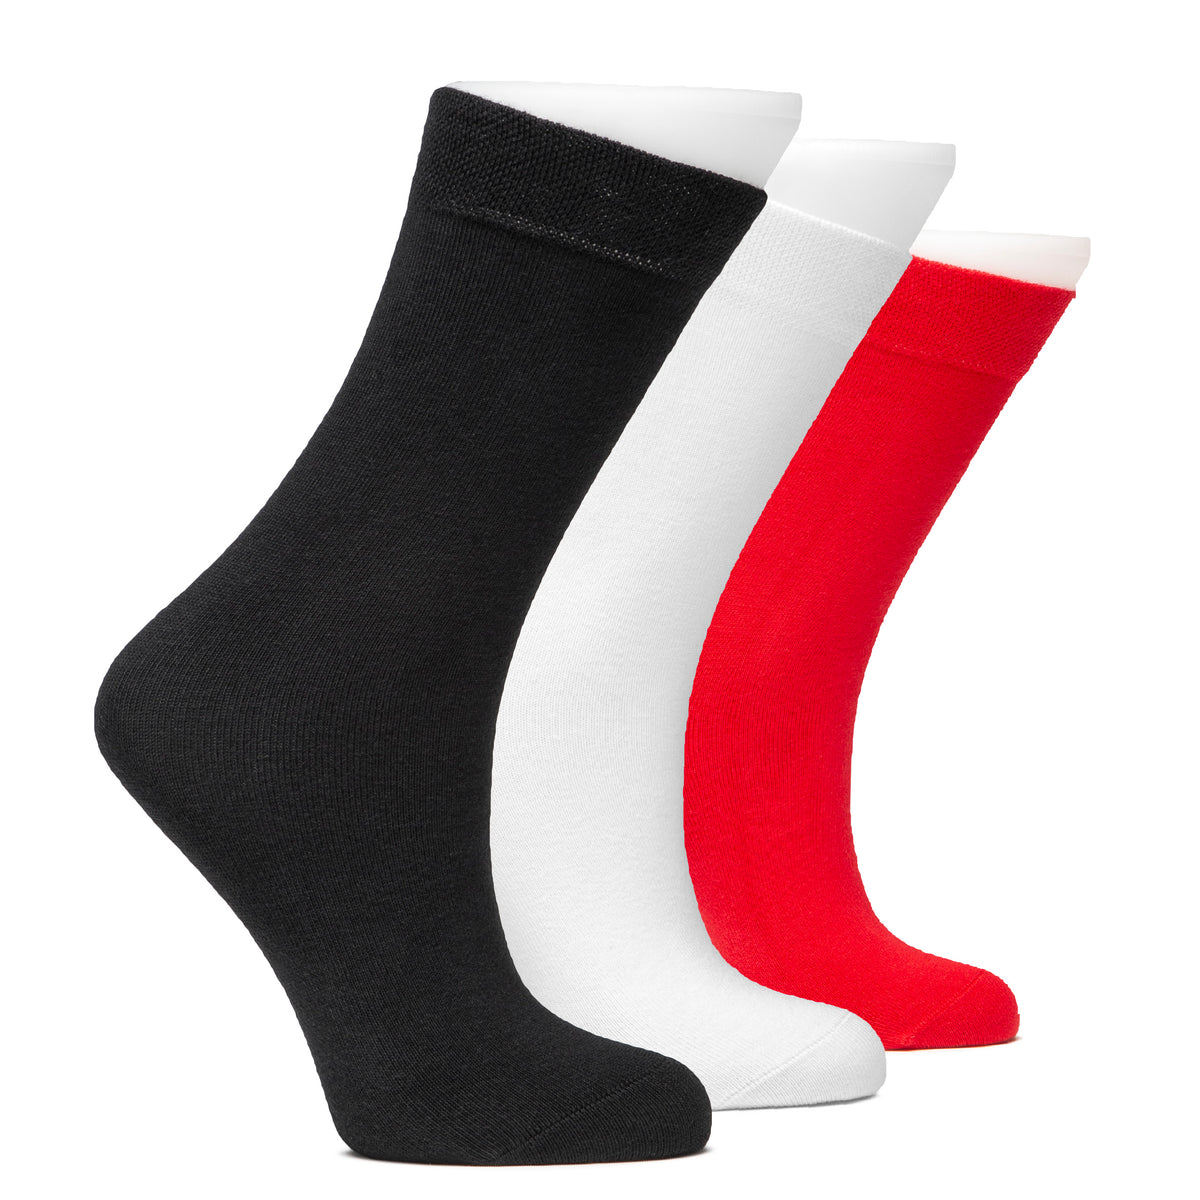 This image depicts three pairs of cotton dress crew socks for kids in black, white, and red colors.